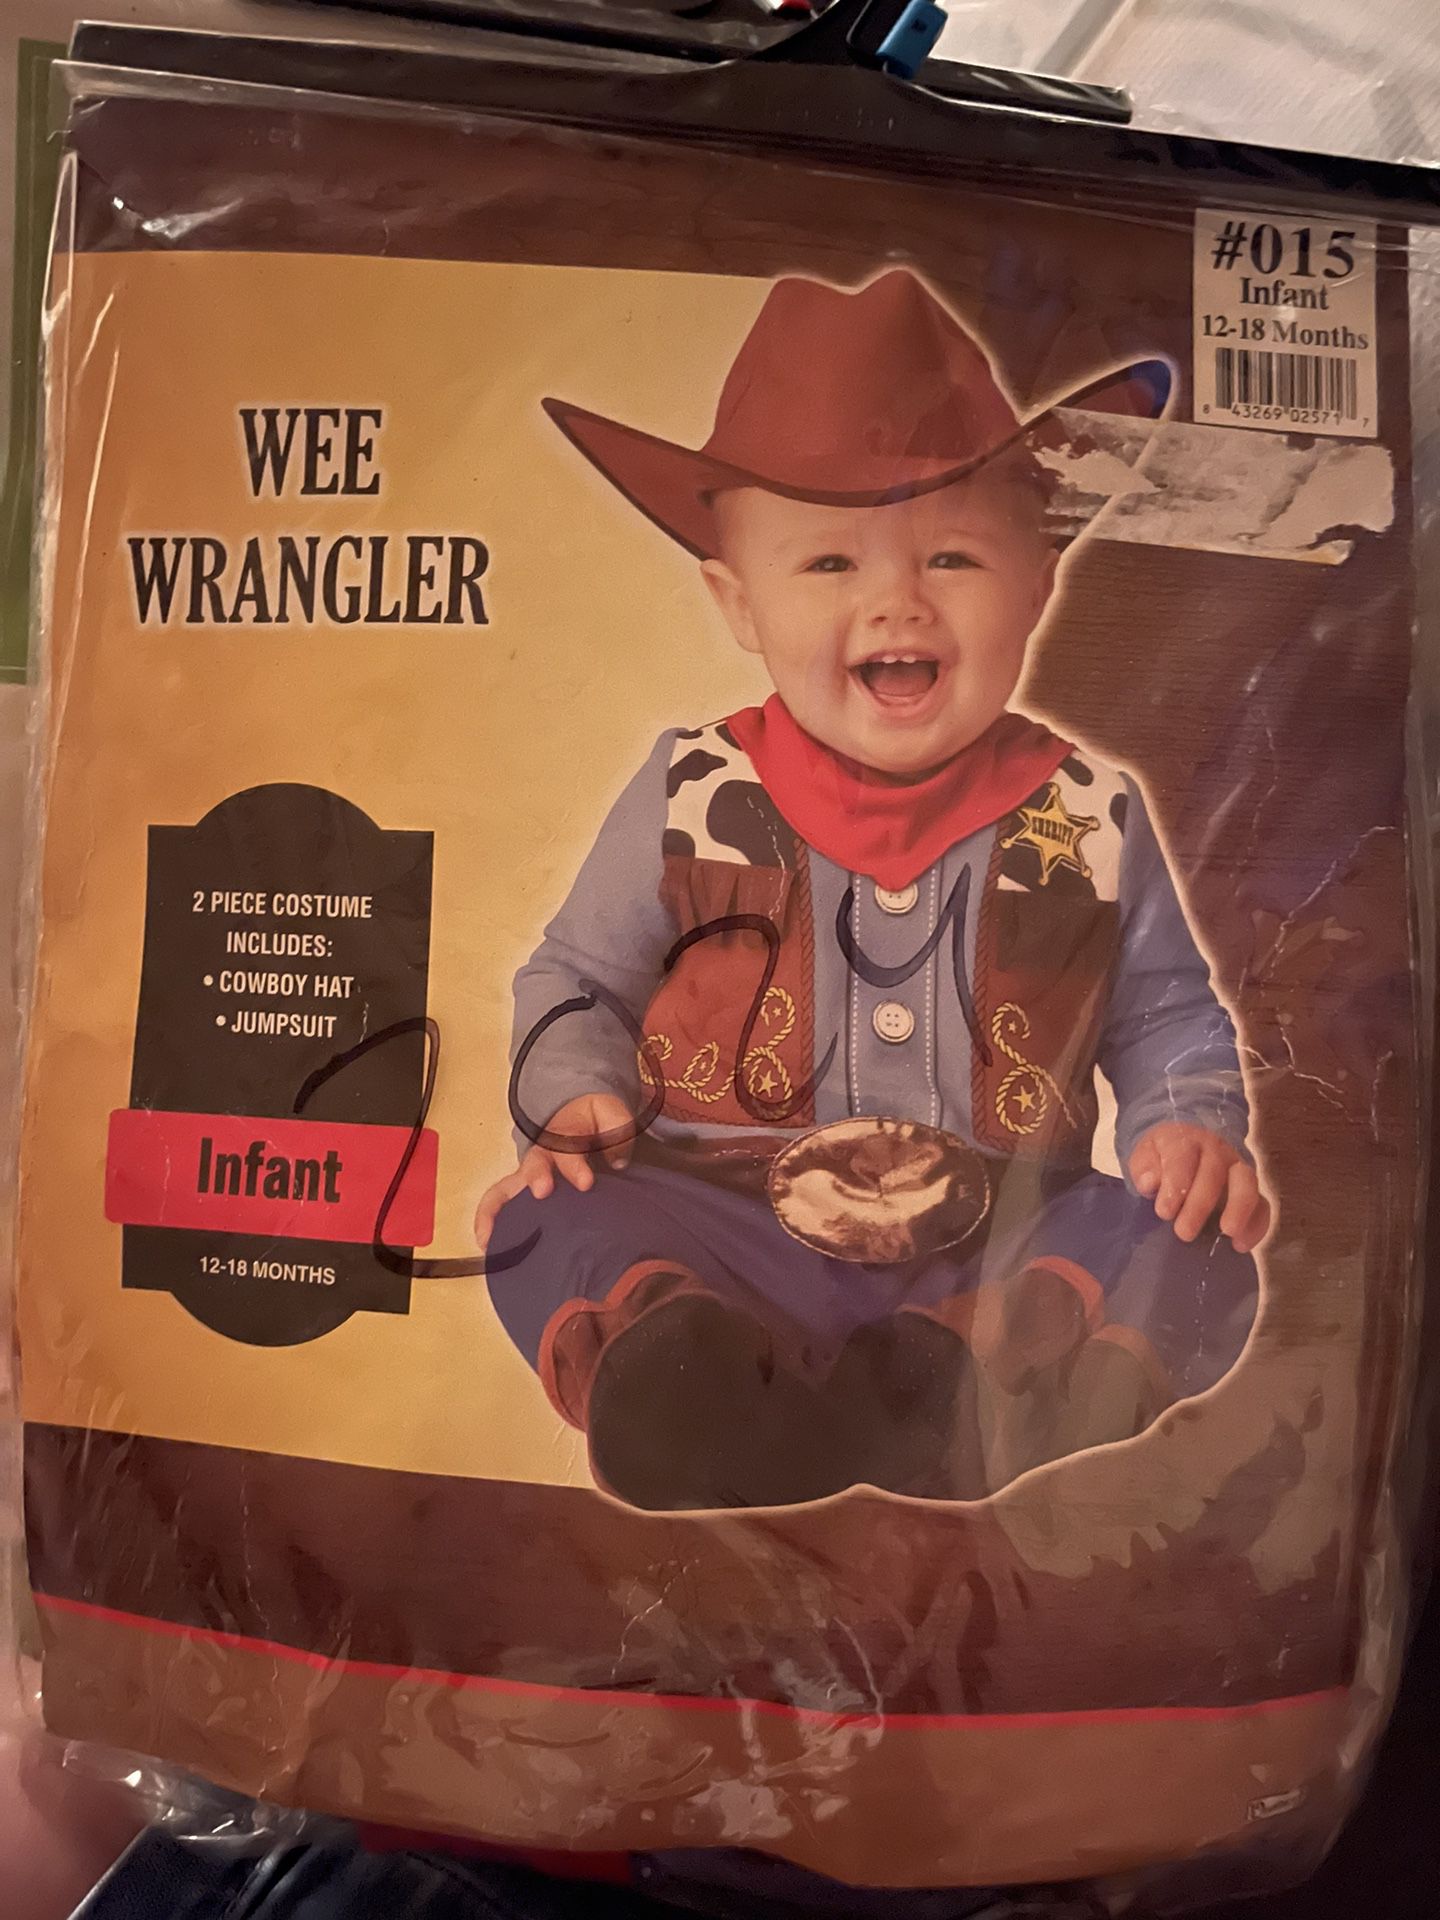 New Halloween Costume- Wee Wrangler Size 12-18 Months